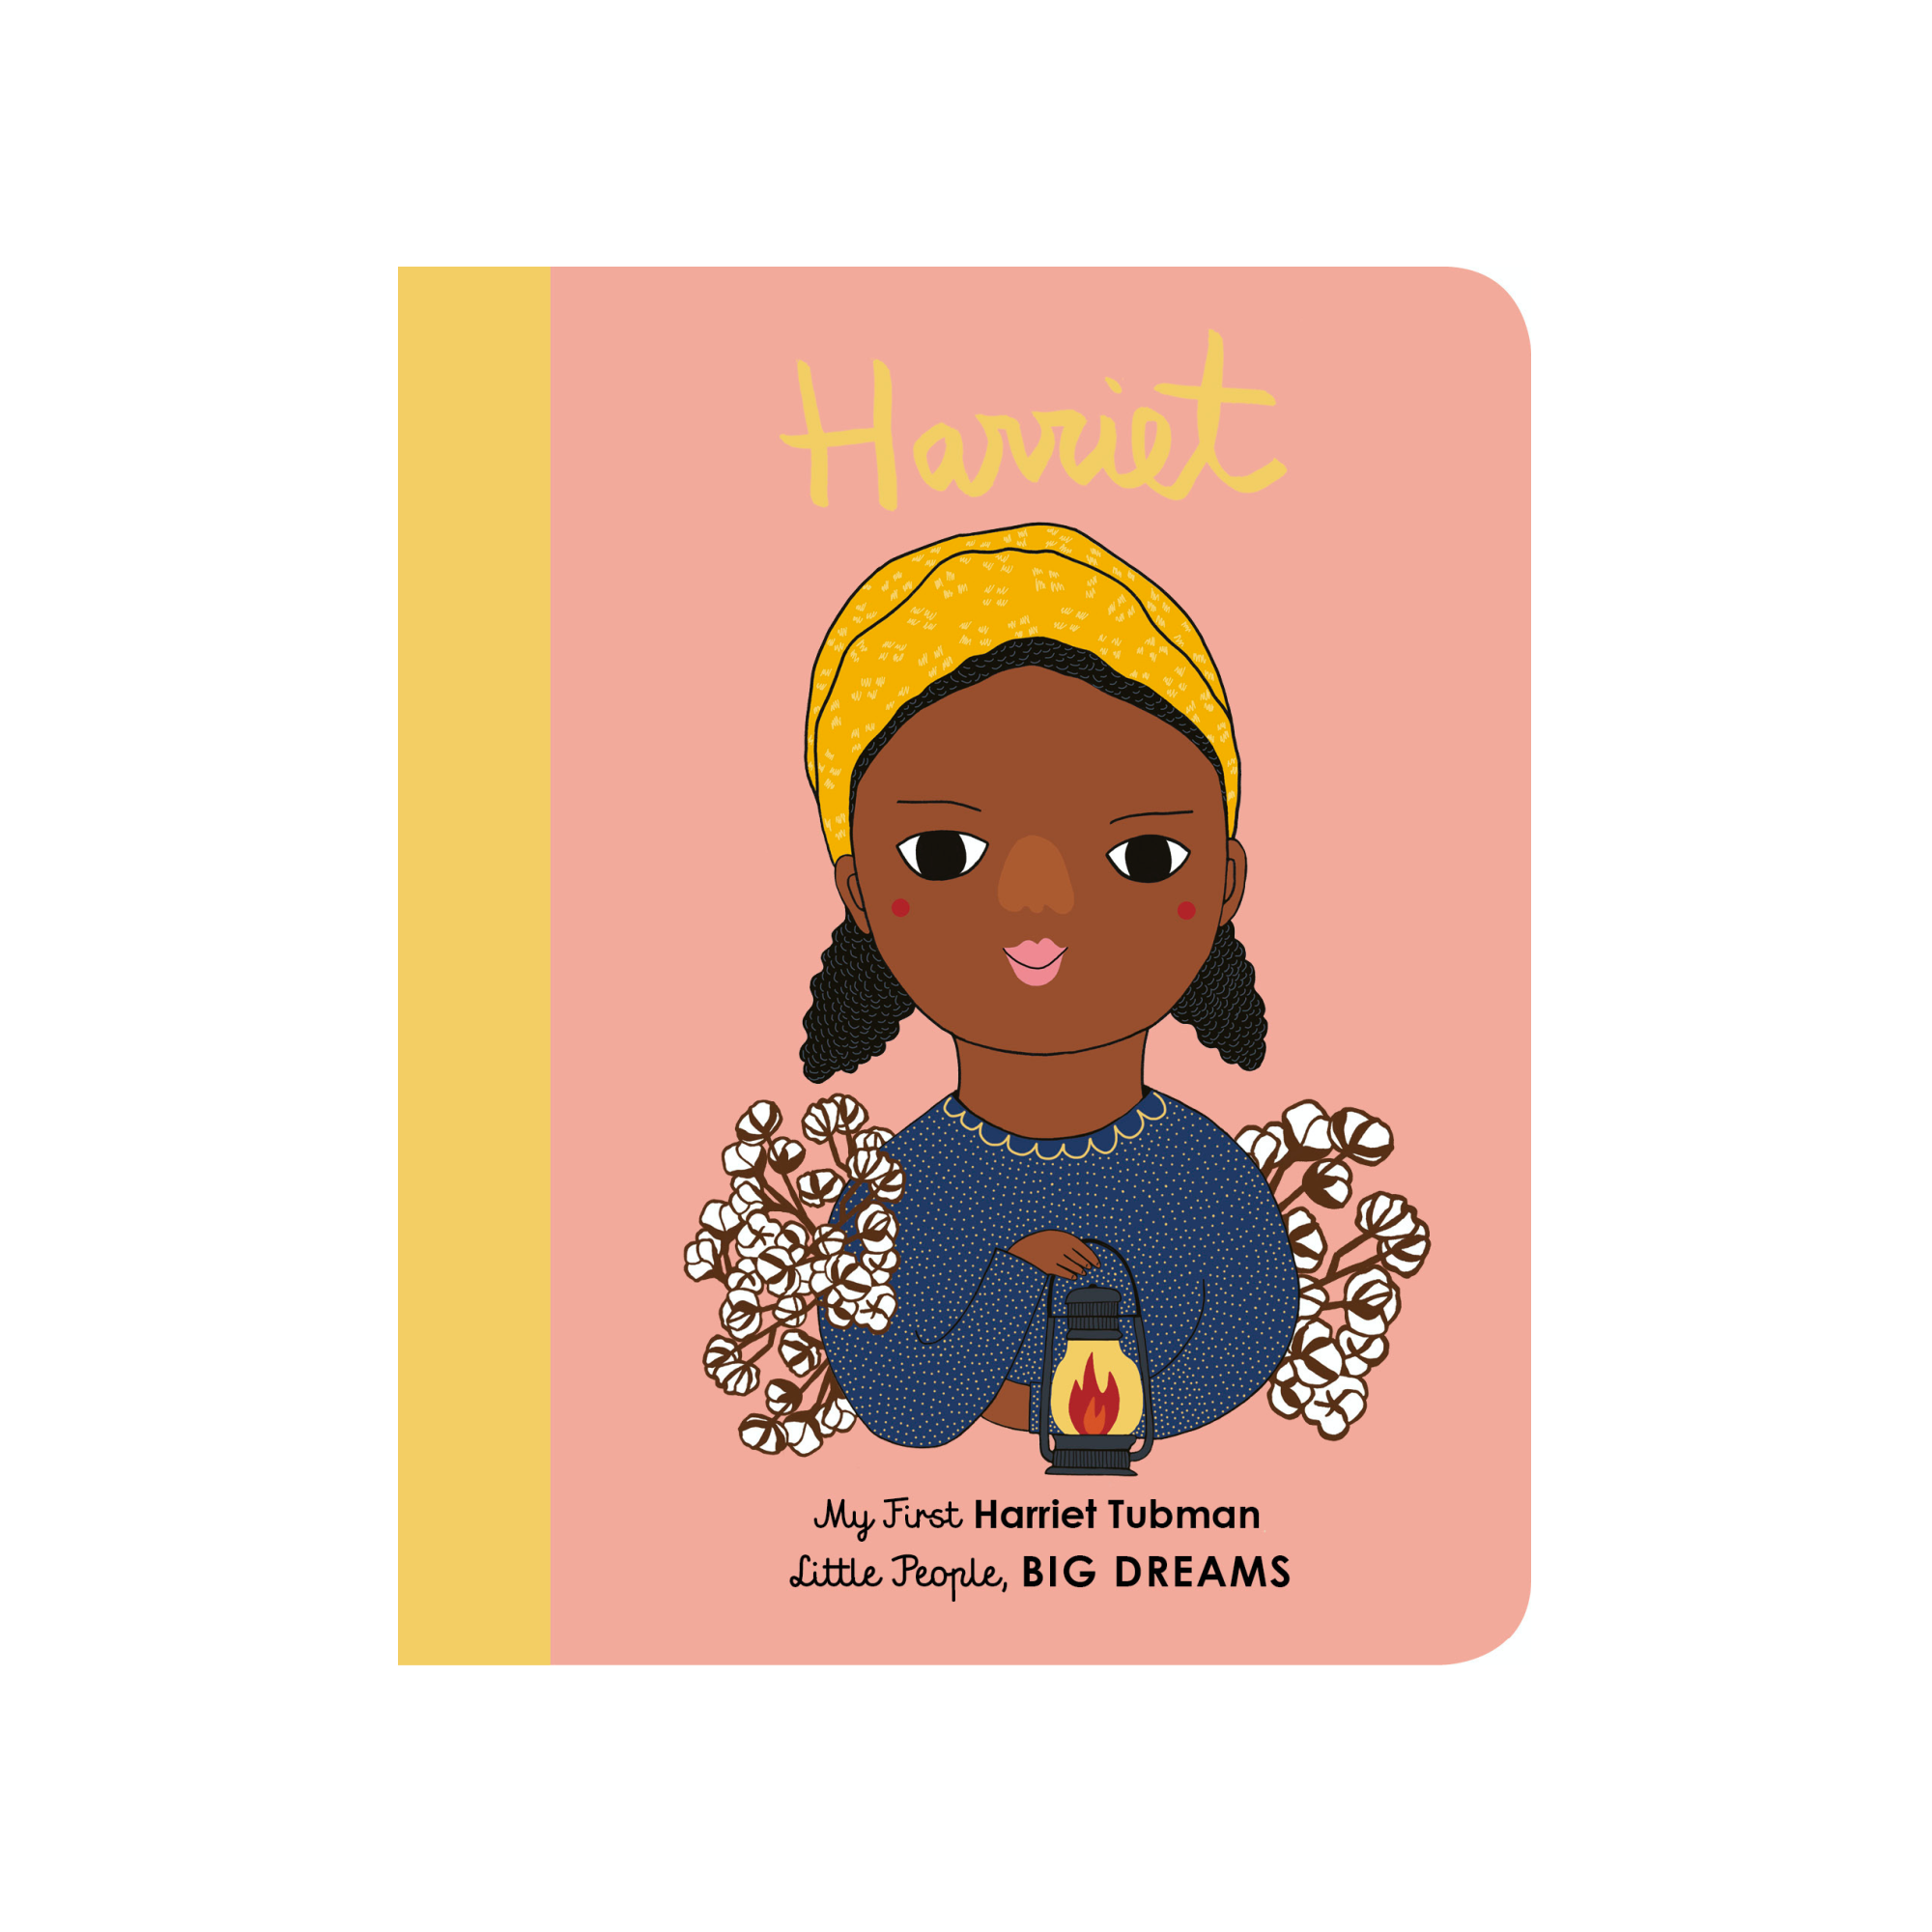 Harriet Tubman - My First Little People, Big Dreams